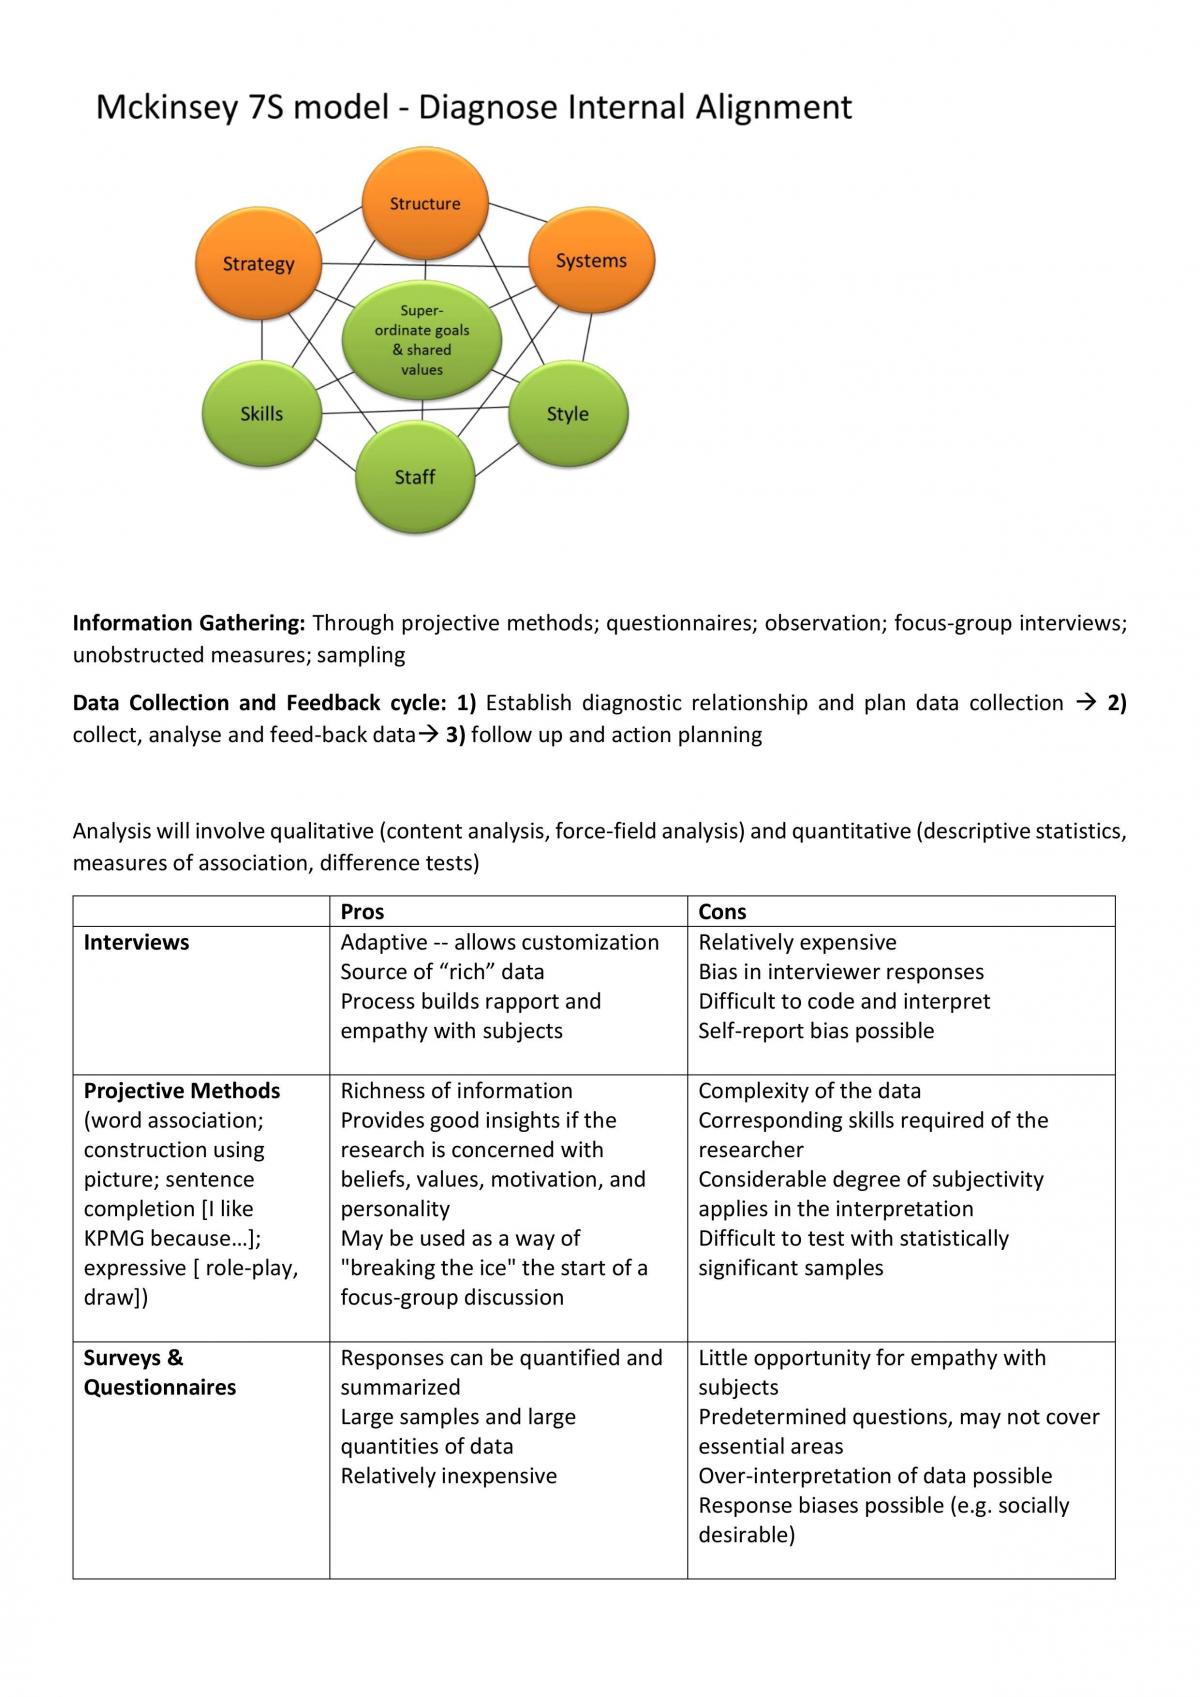 BH3604 - Managing Organisational Change (Complete notes) - Page 22